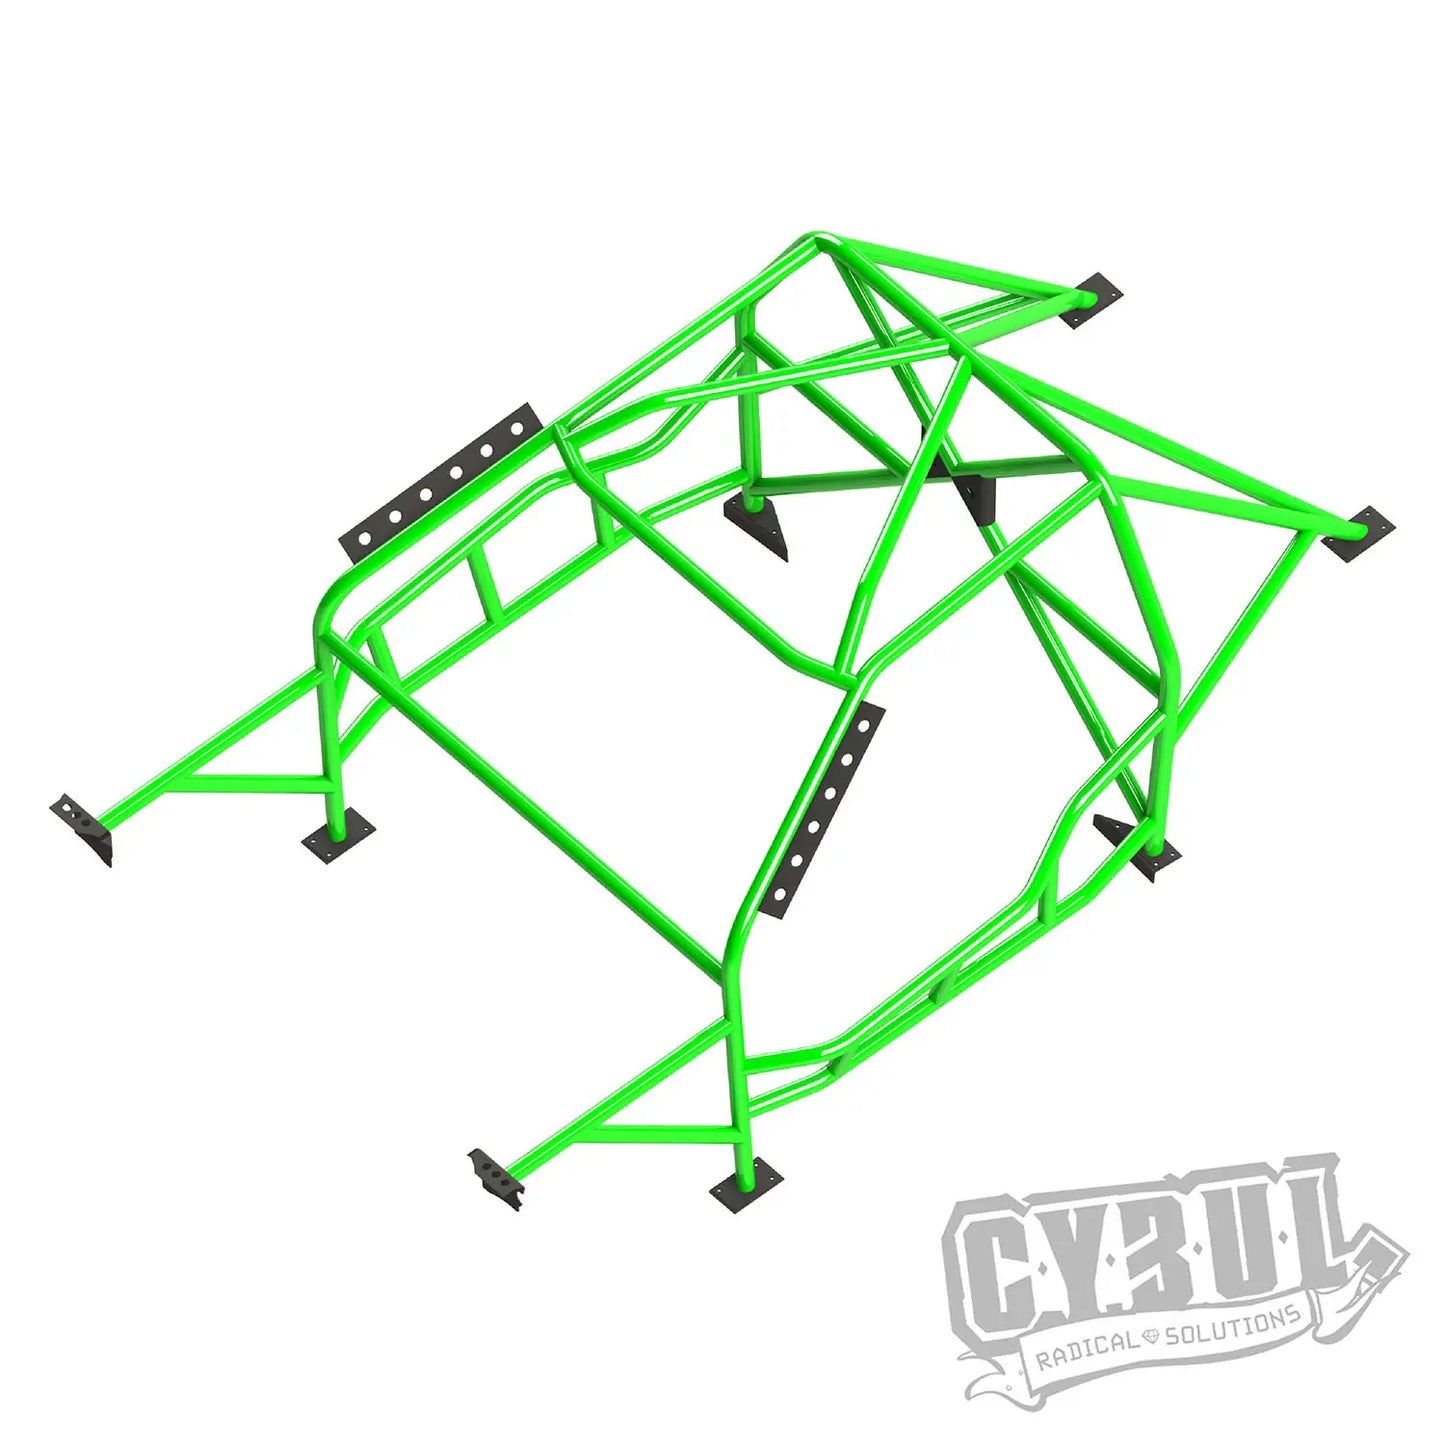 BMW E46 V4 roll cage with NASCAR door bars